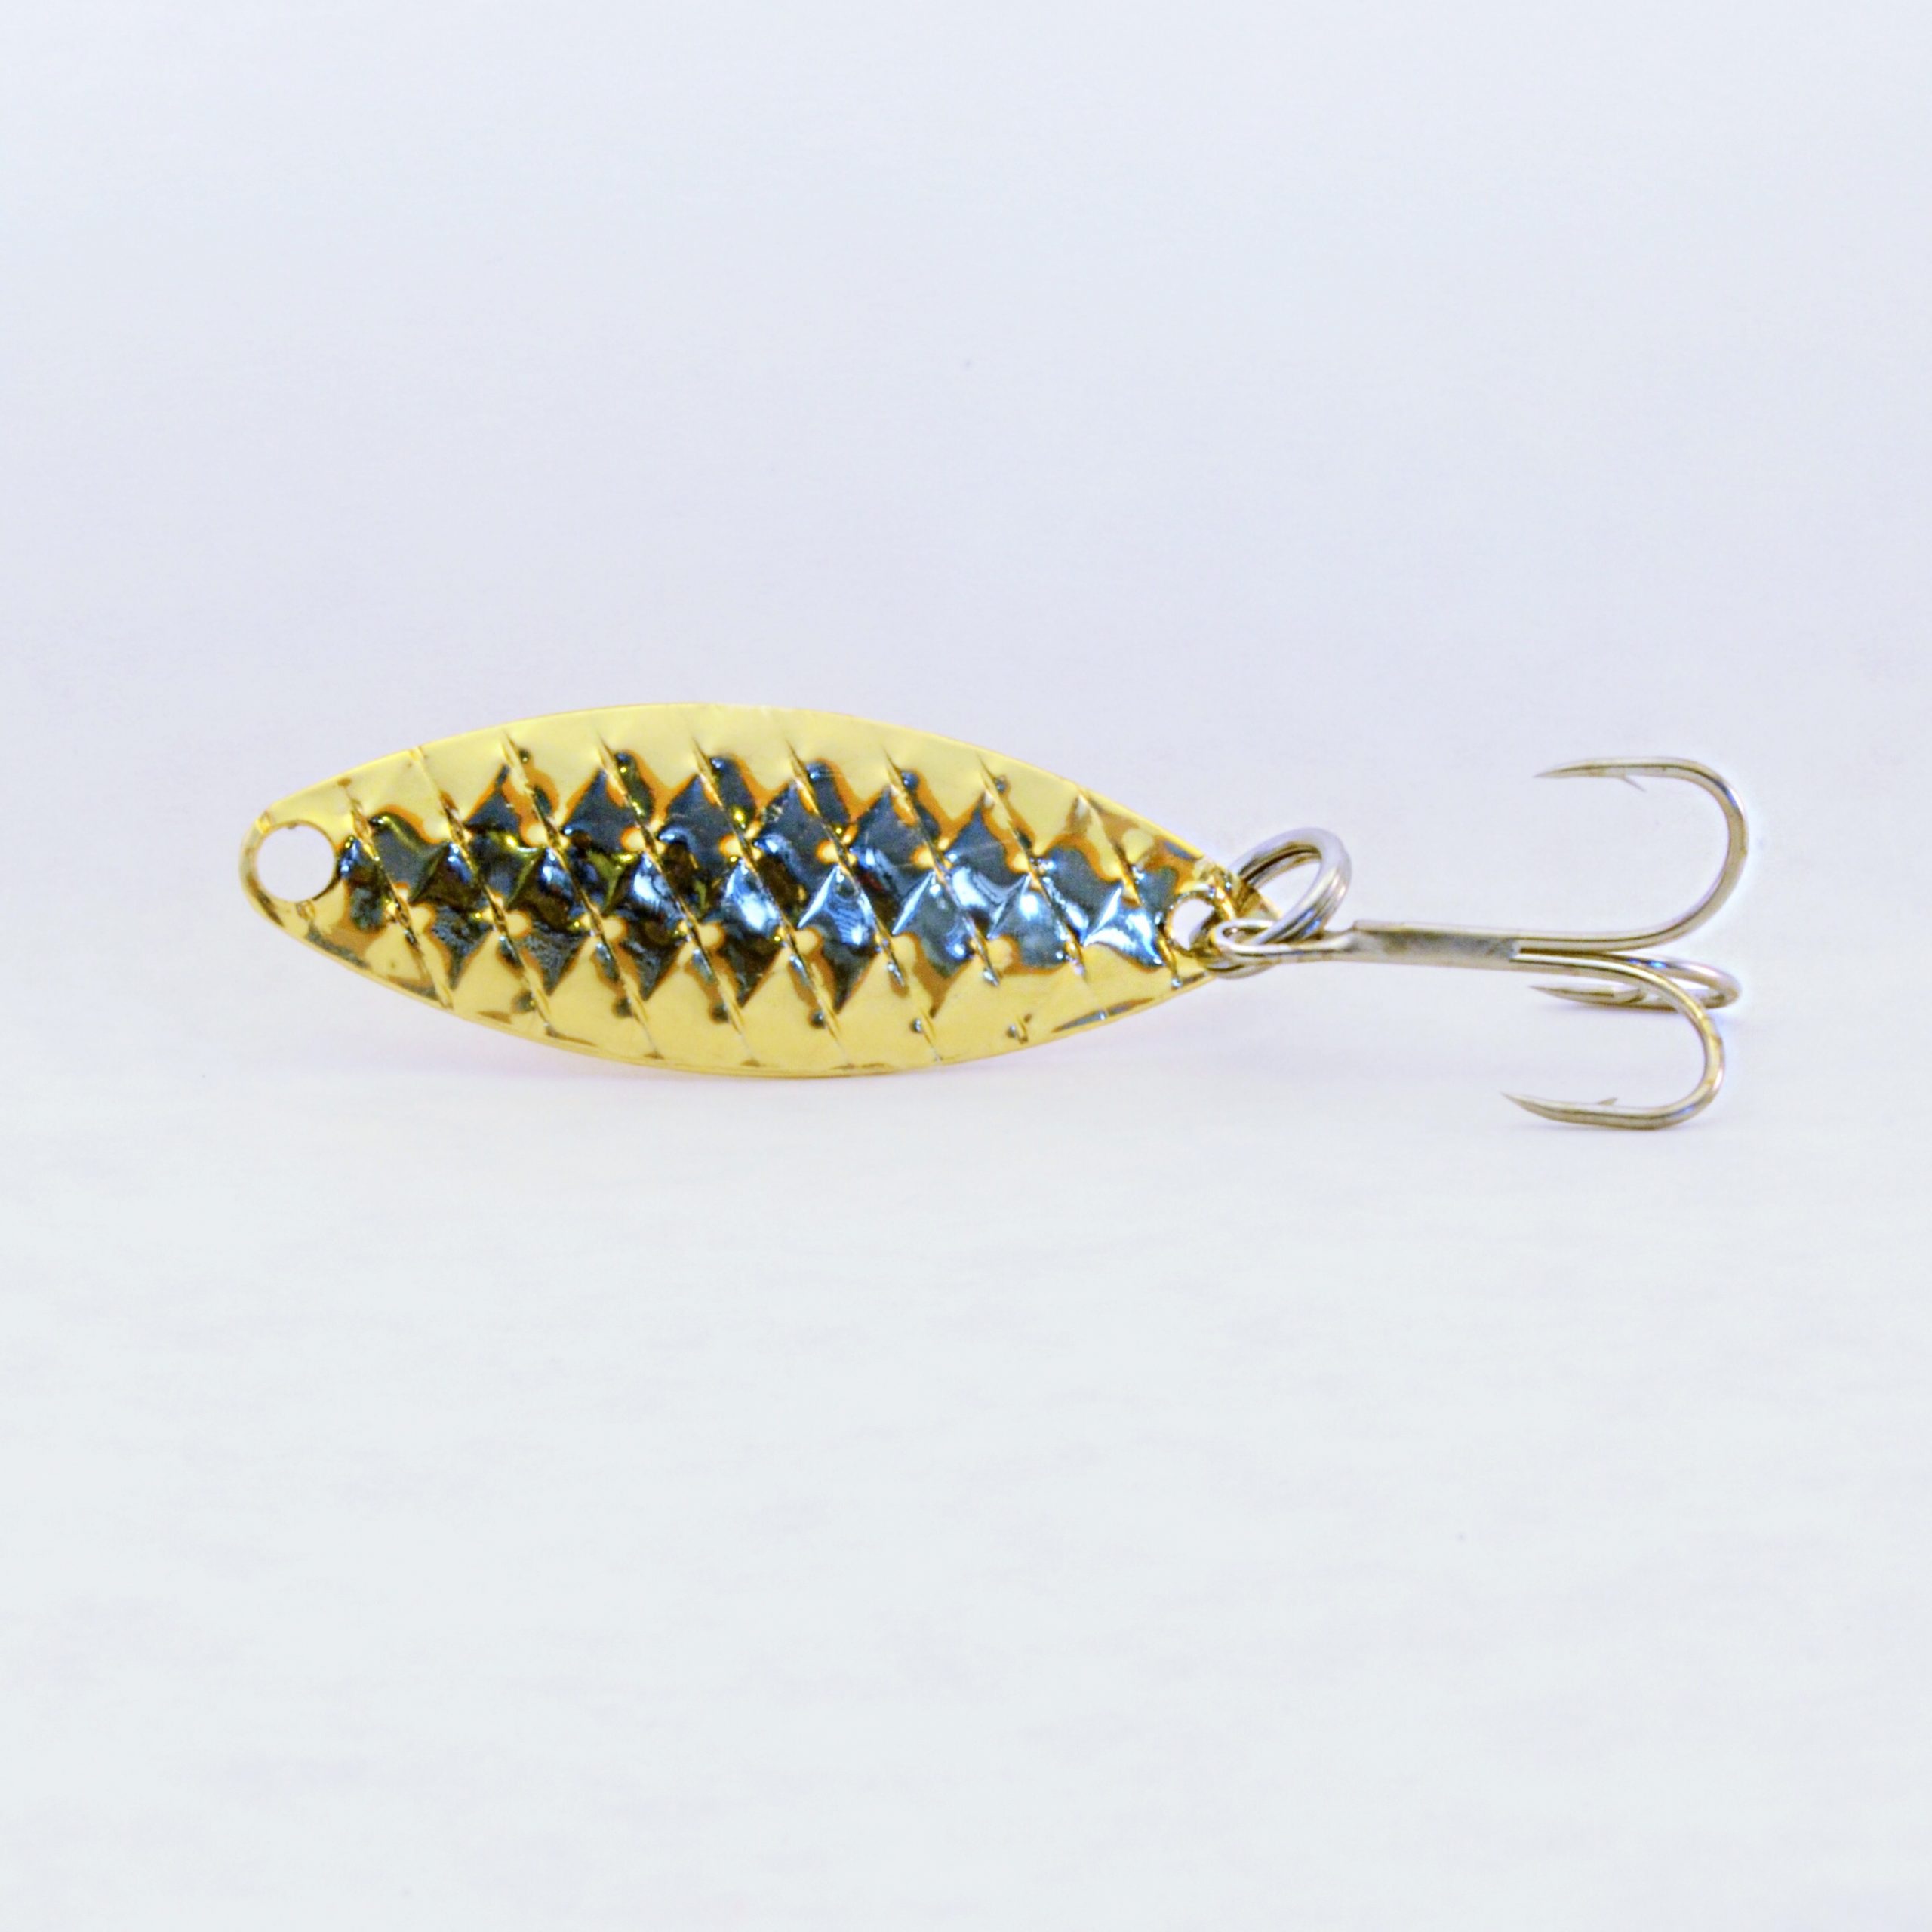 The 24 Kt Gold Uv Flashy Fish Lures